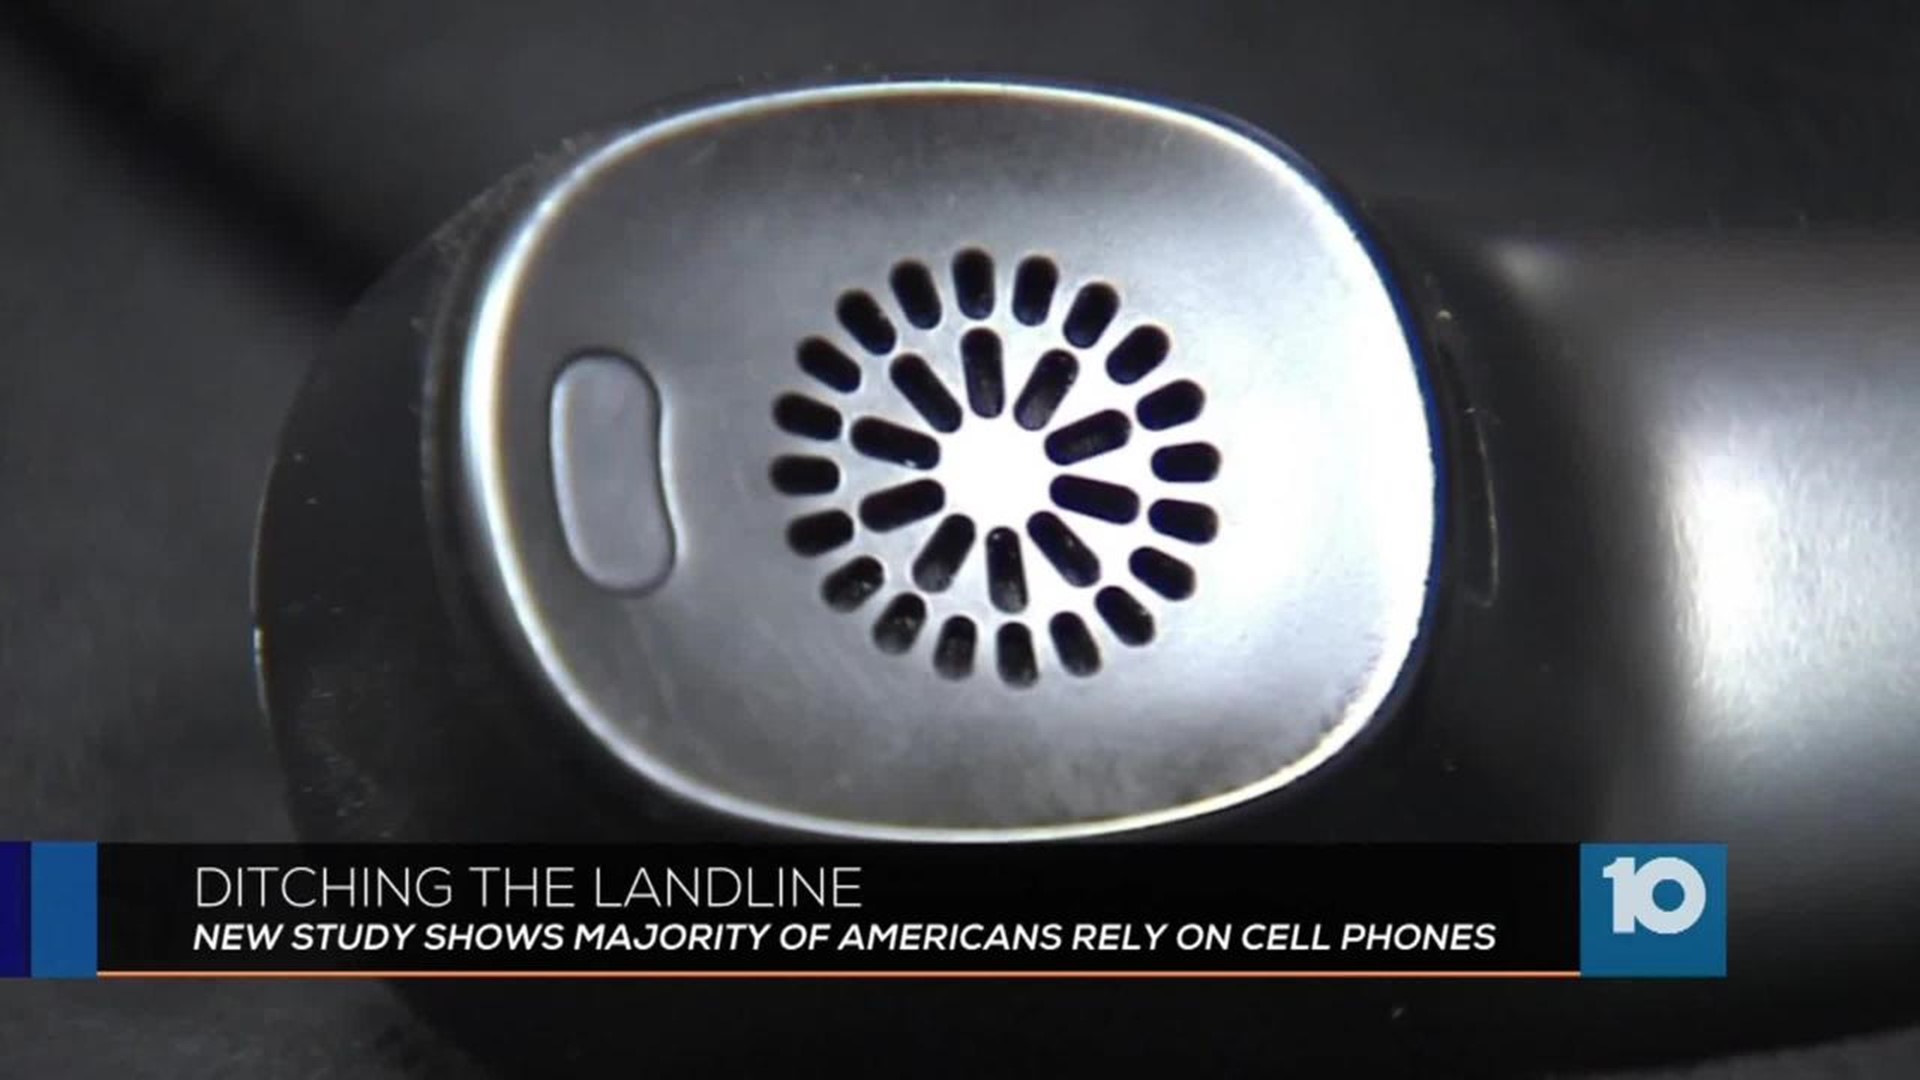 Some cling to landlines, but cellonly homes now dominate